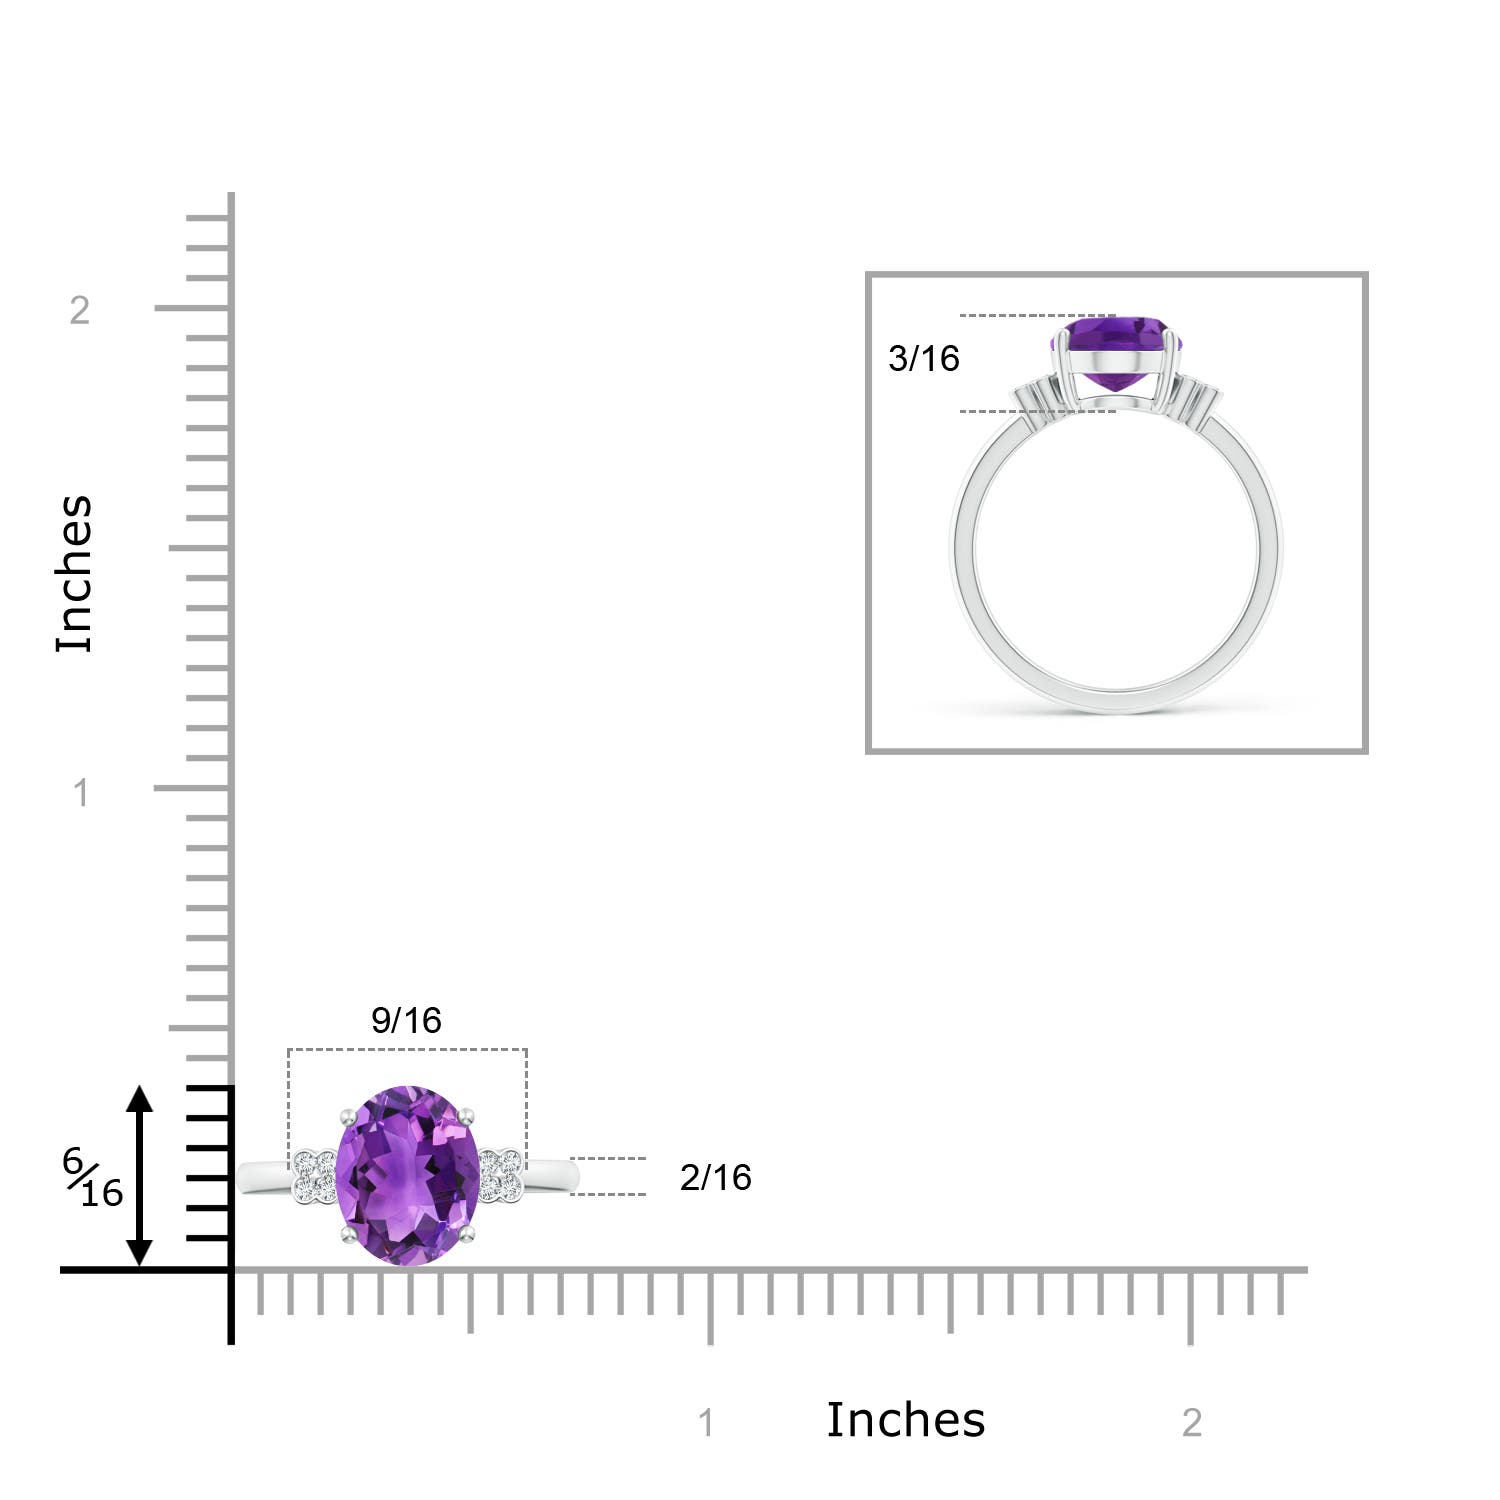 AAA- Amethyst / 2.36 CT / 14 KT White Gold